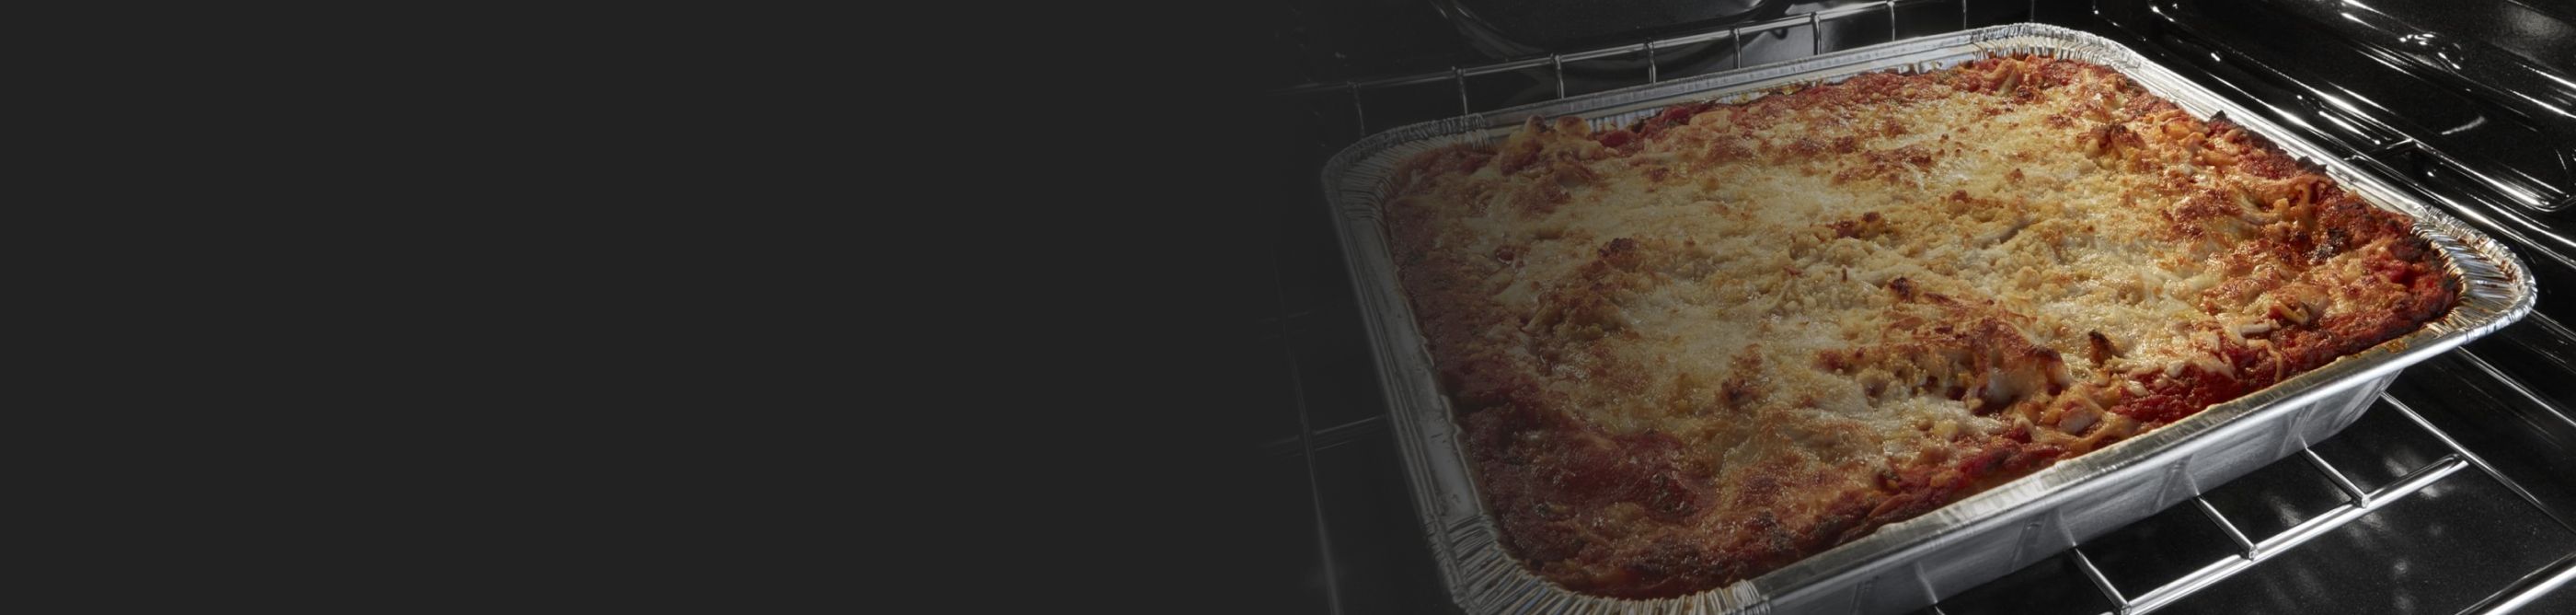 Casserole in a disposable baking tray